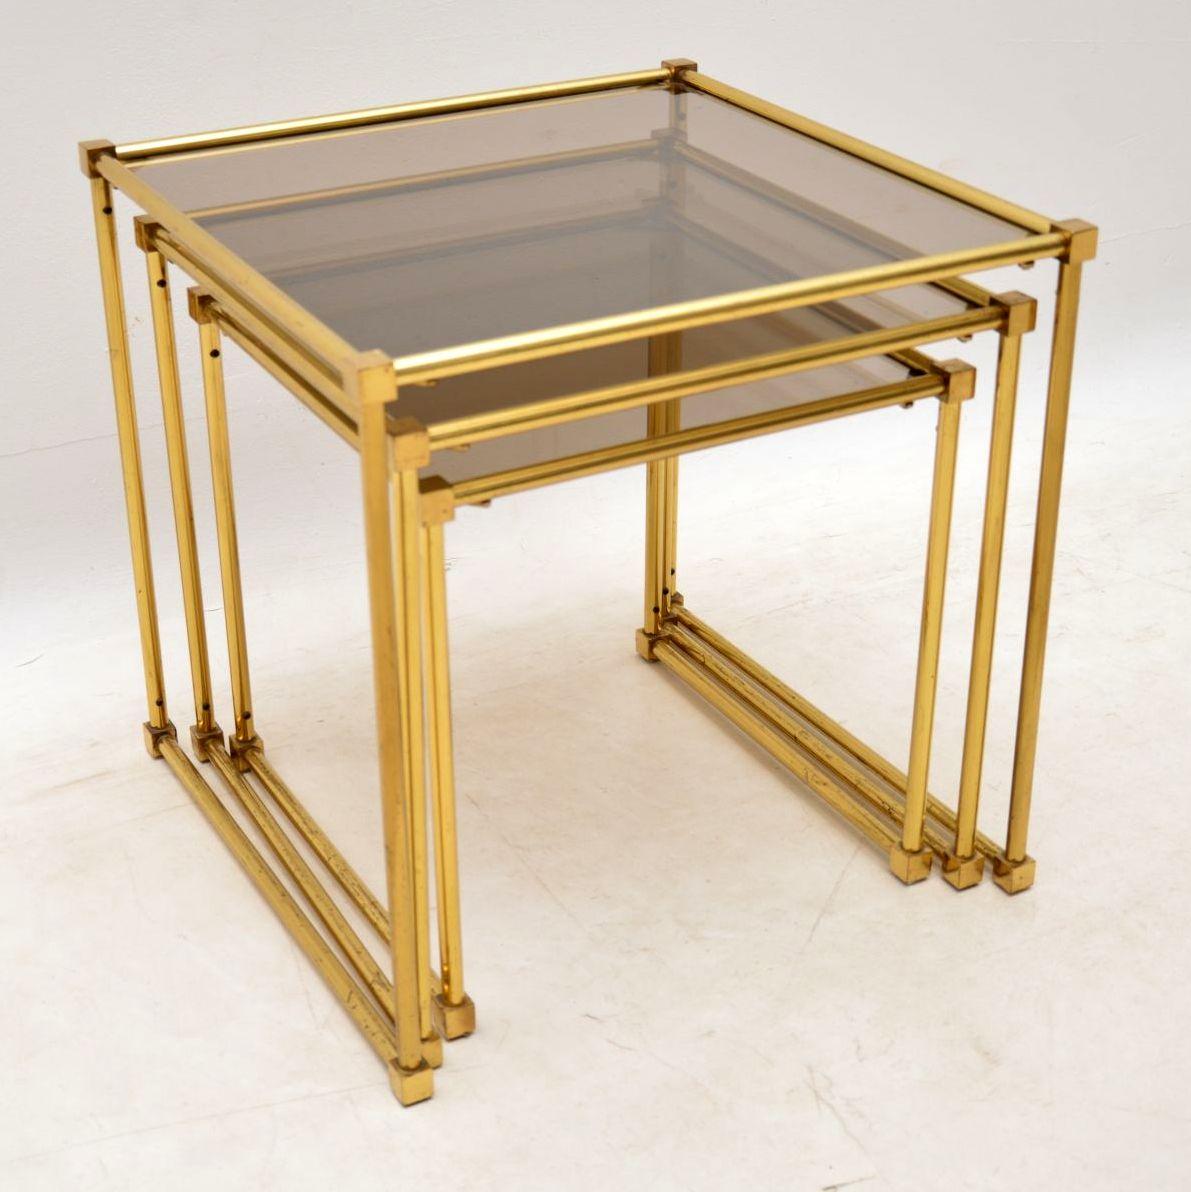 A stylish and extremely well made nest of brass tables, these were made in Italy and they date from around the 1970s. The quality is superb, and they are in excellent condition for their age, with only some extremely minor wear here and